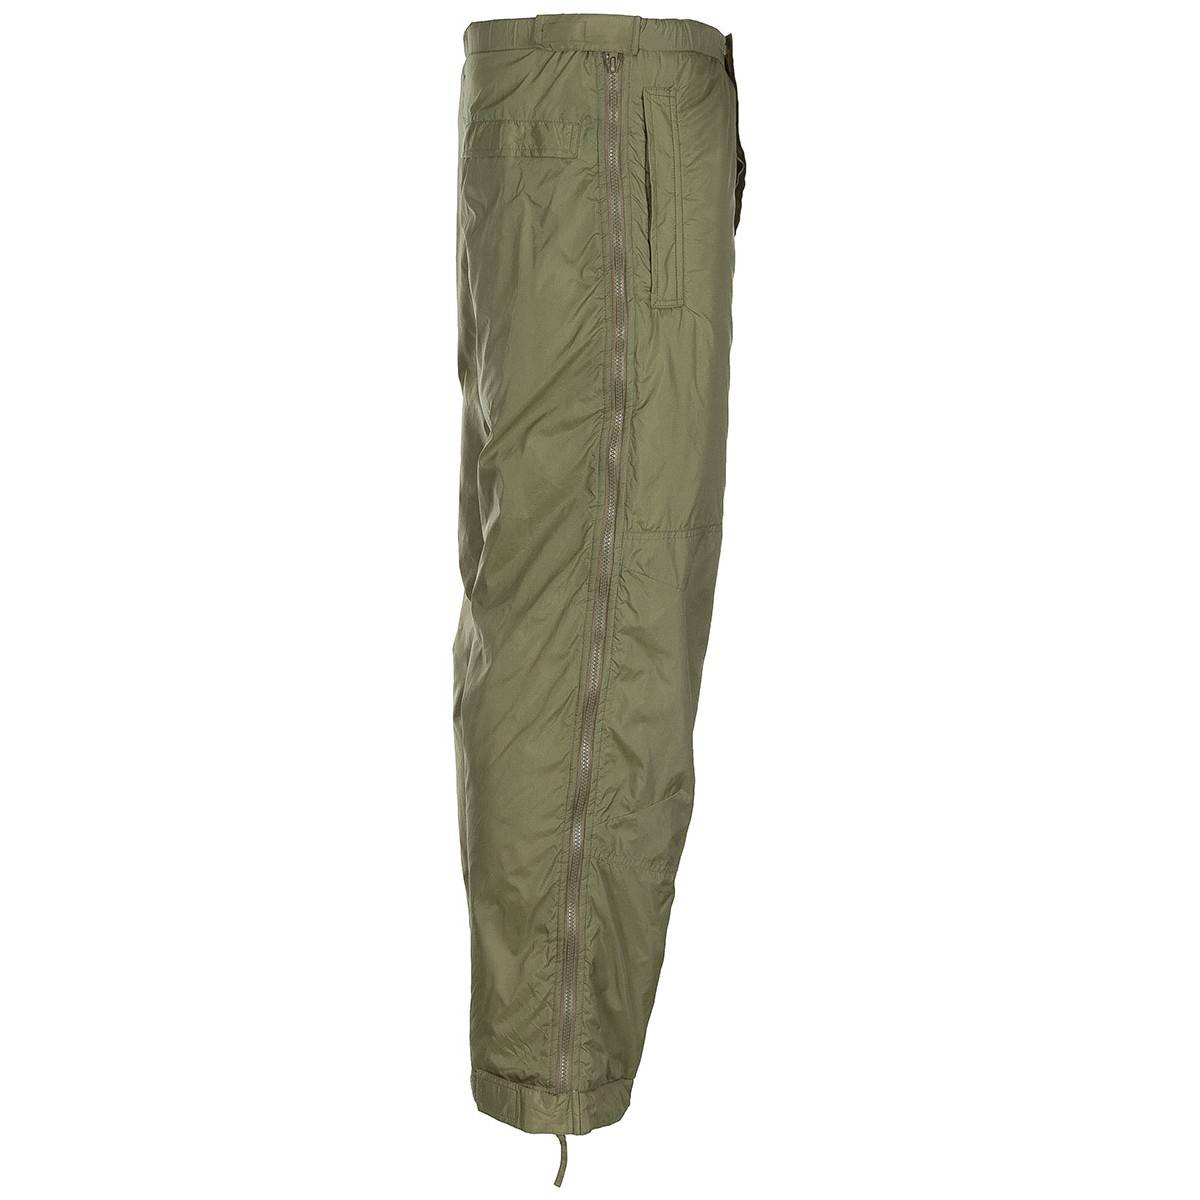 GB THERMAL PANTS - OD GREEN - USED | Military Surplus \ Used Clothing ...